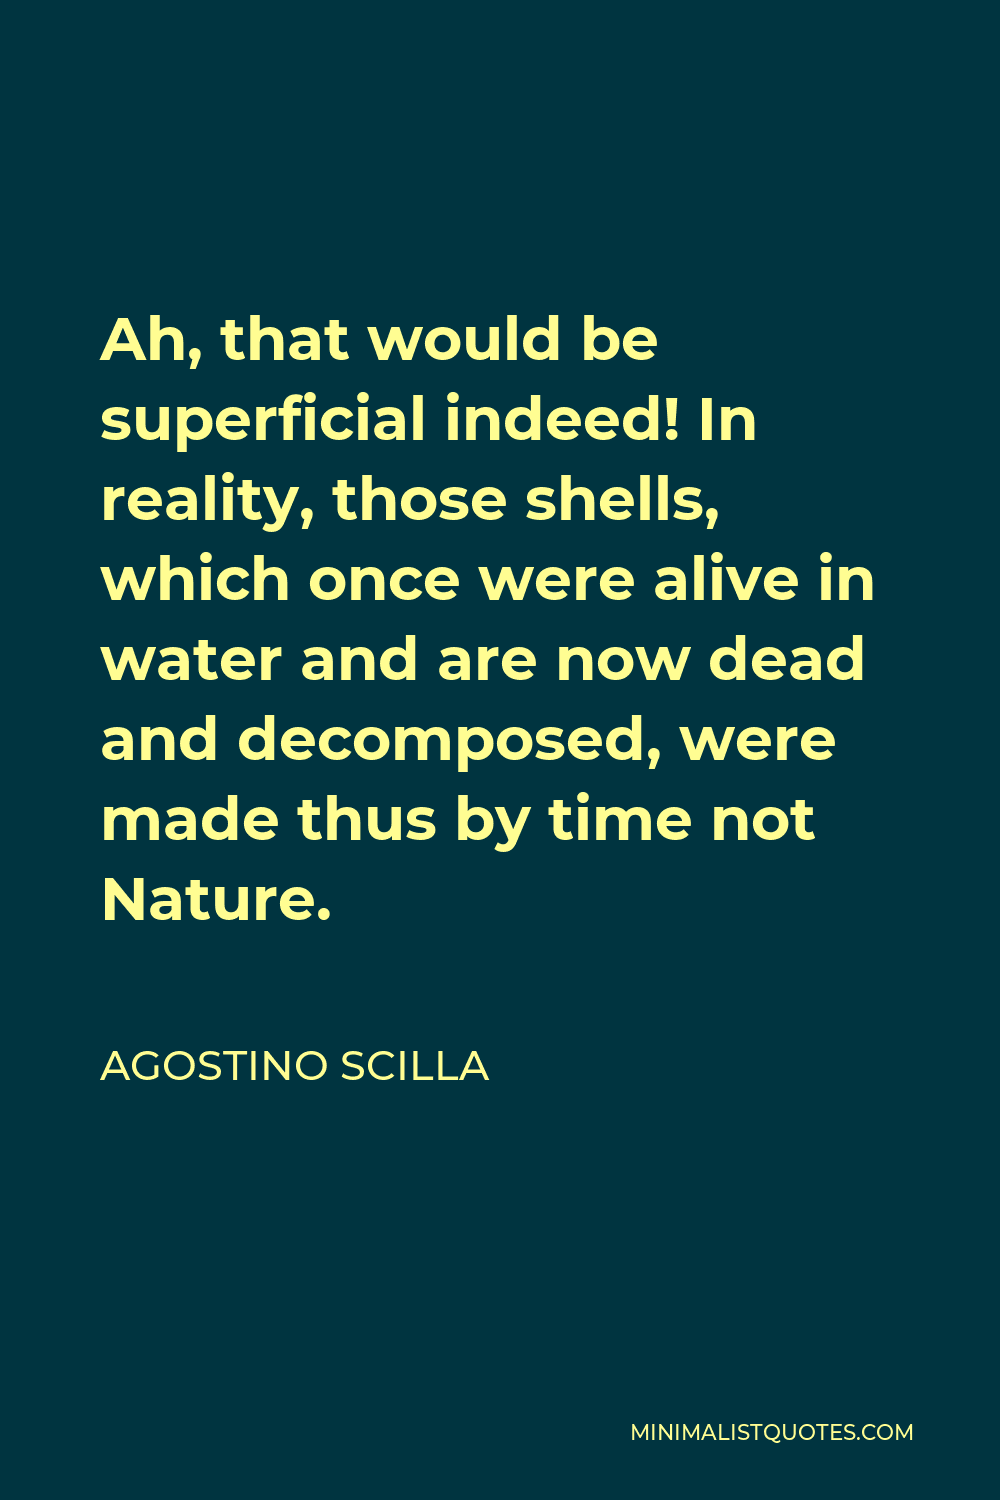 Agostino Scilla Quote - Ah, that would be superficial indeed! In reality, those shells, which once were alive in water and are now dead and decomposed, were made thus by time not Nature.